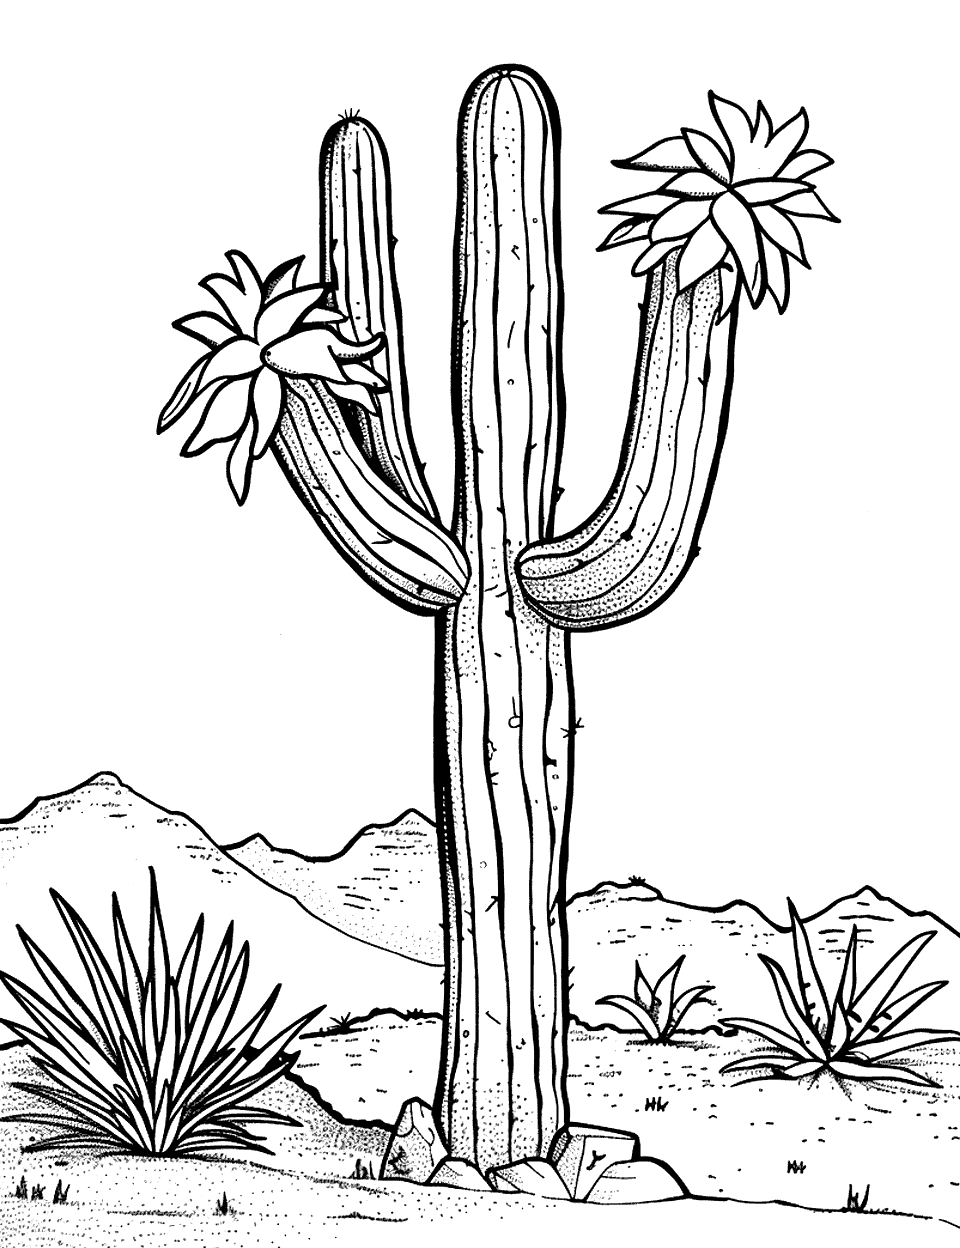 Lone Cactus in the Desert Coloring Page - A single cactus standing tall in the desert, with a mountain backdrop.